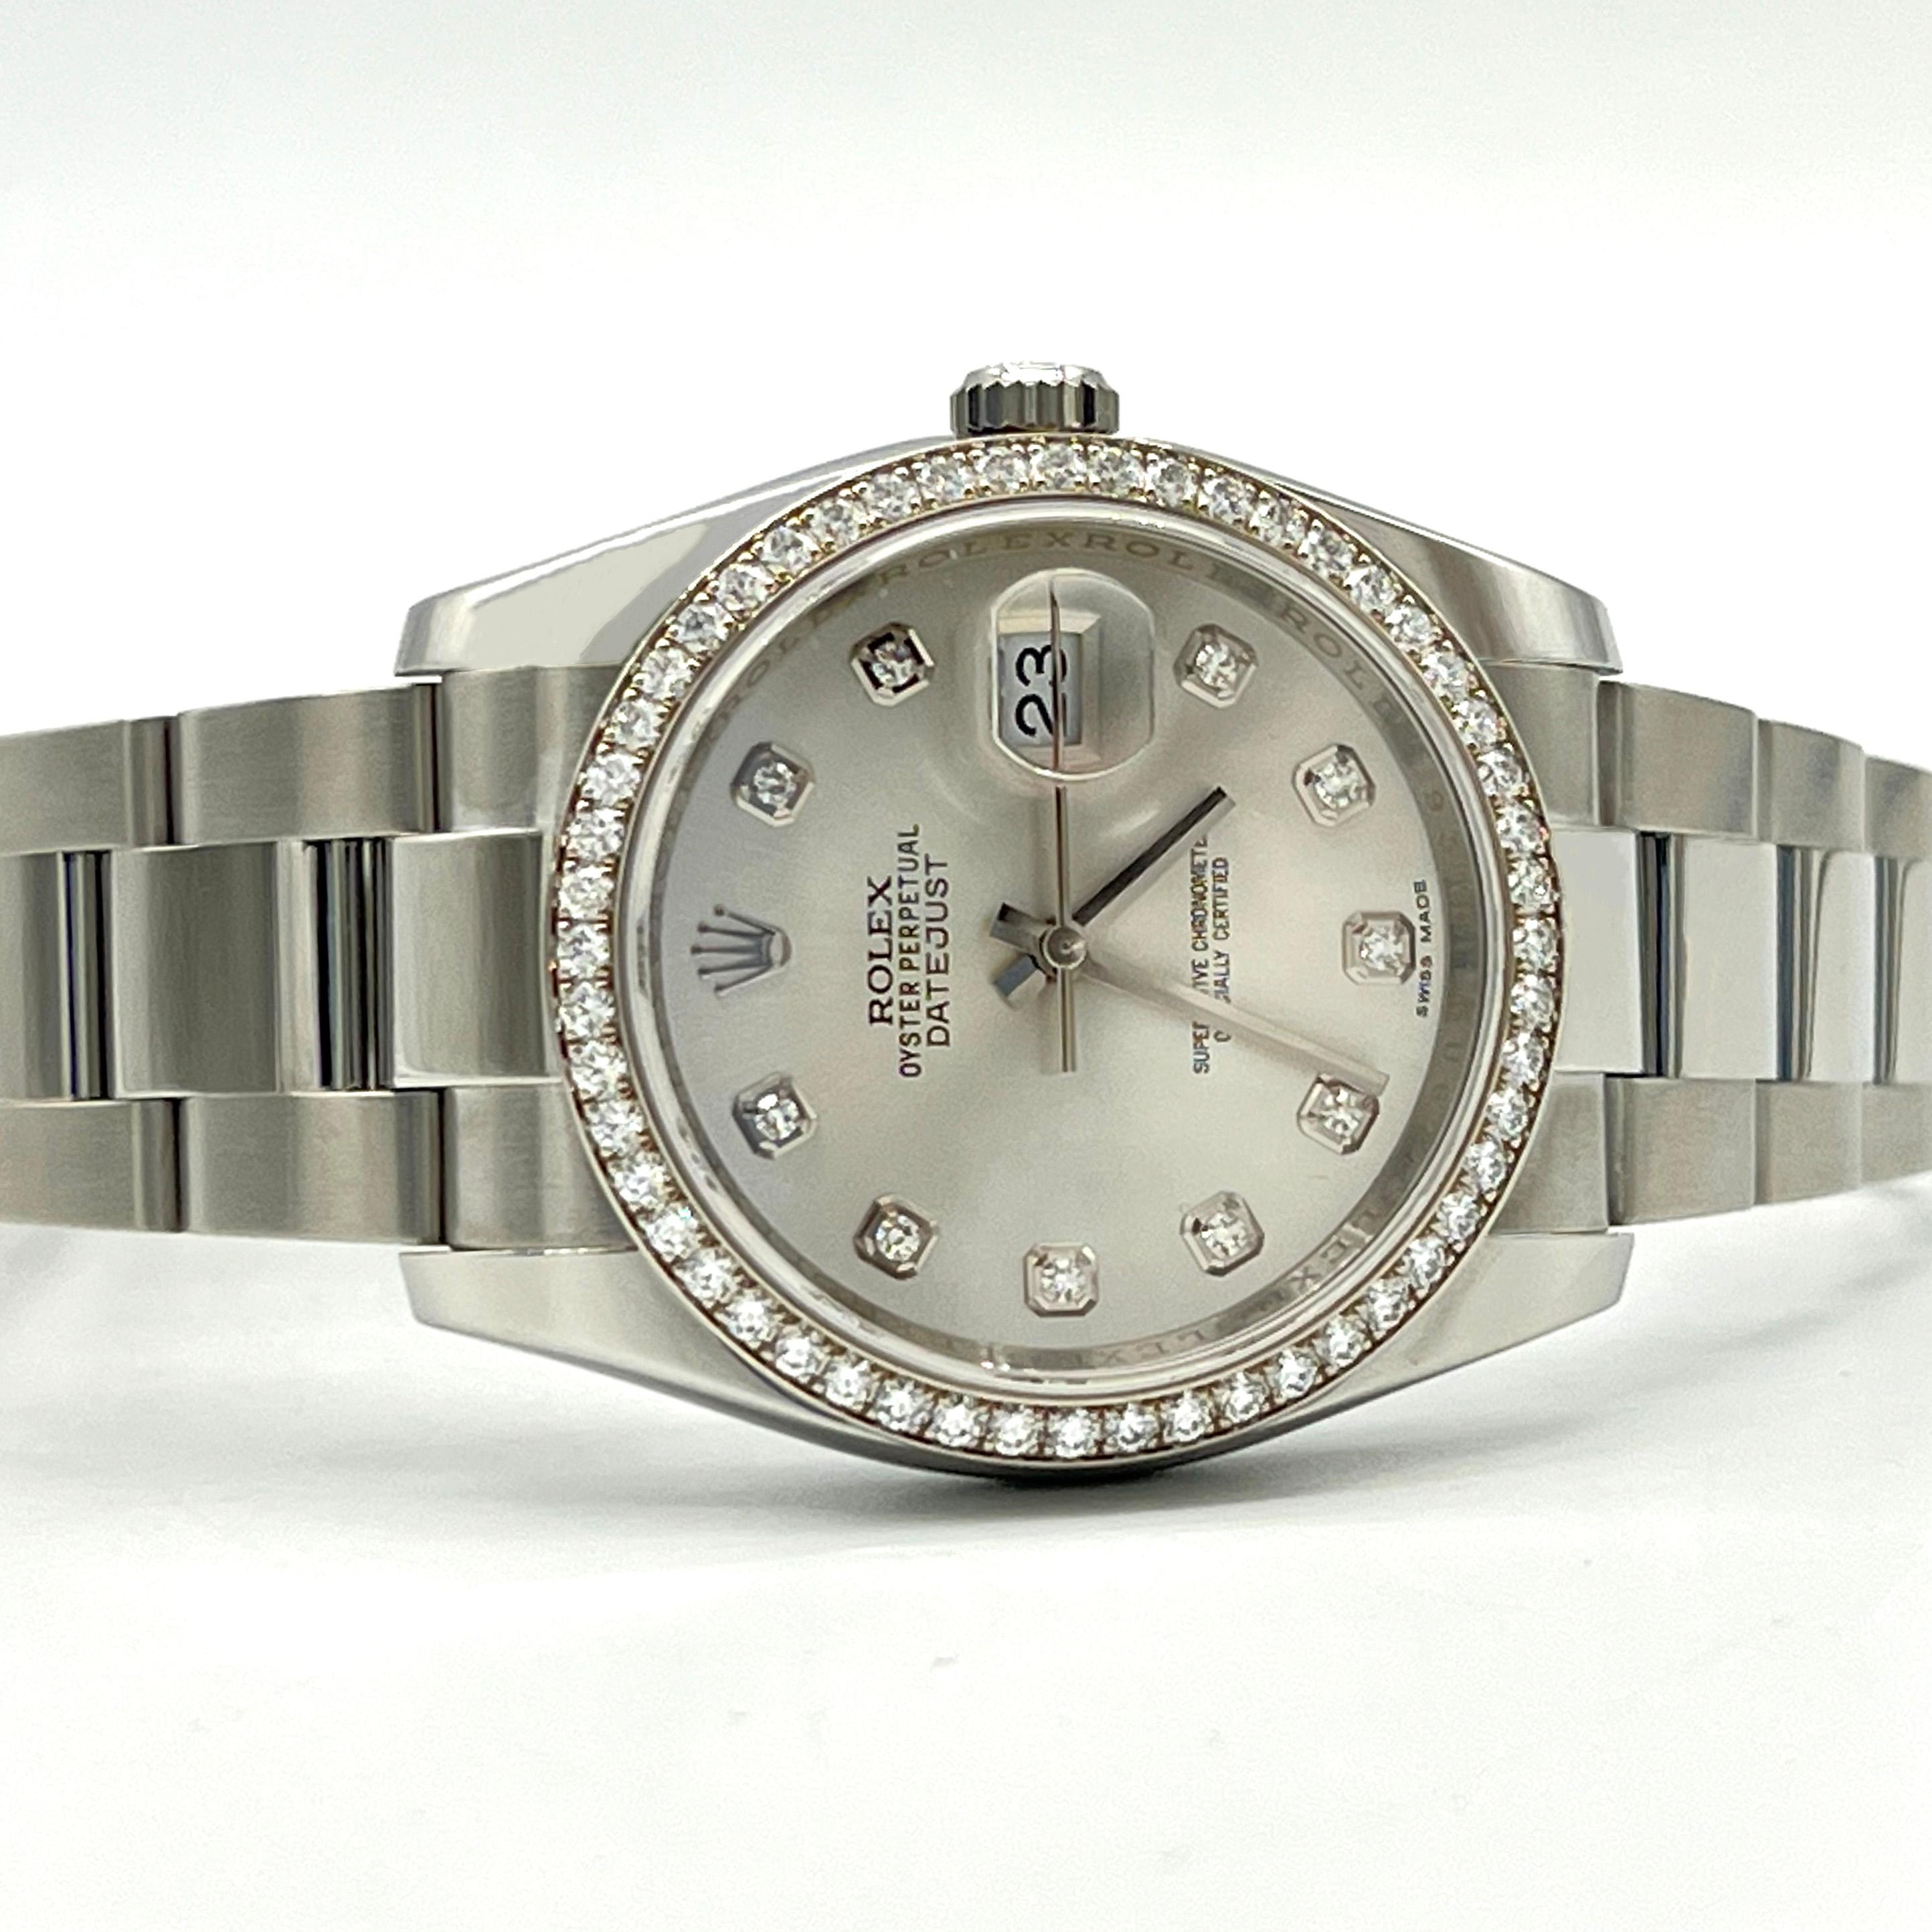 Brand New Elegant Rolex Datejust, Reference Number : 116244 ; 36mm The case material is Steel features a Factory Diamond Smooth Silver Dial & Original Diamond Index, self-winding waterproof chronometer feature a window displaying the date. Magnifiée